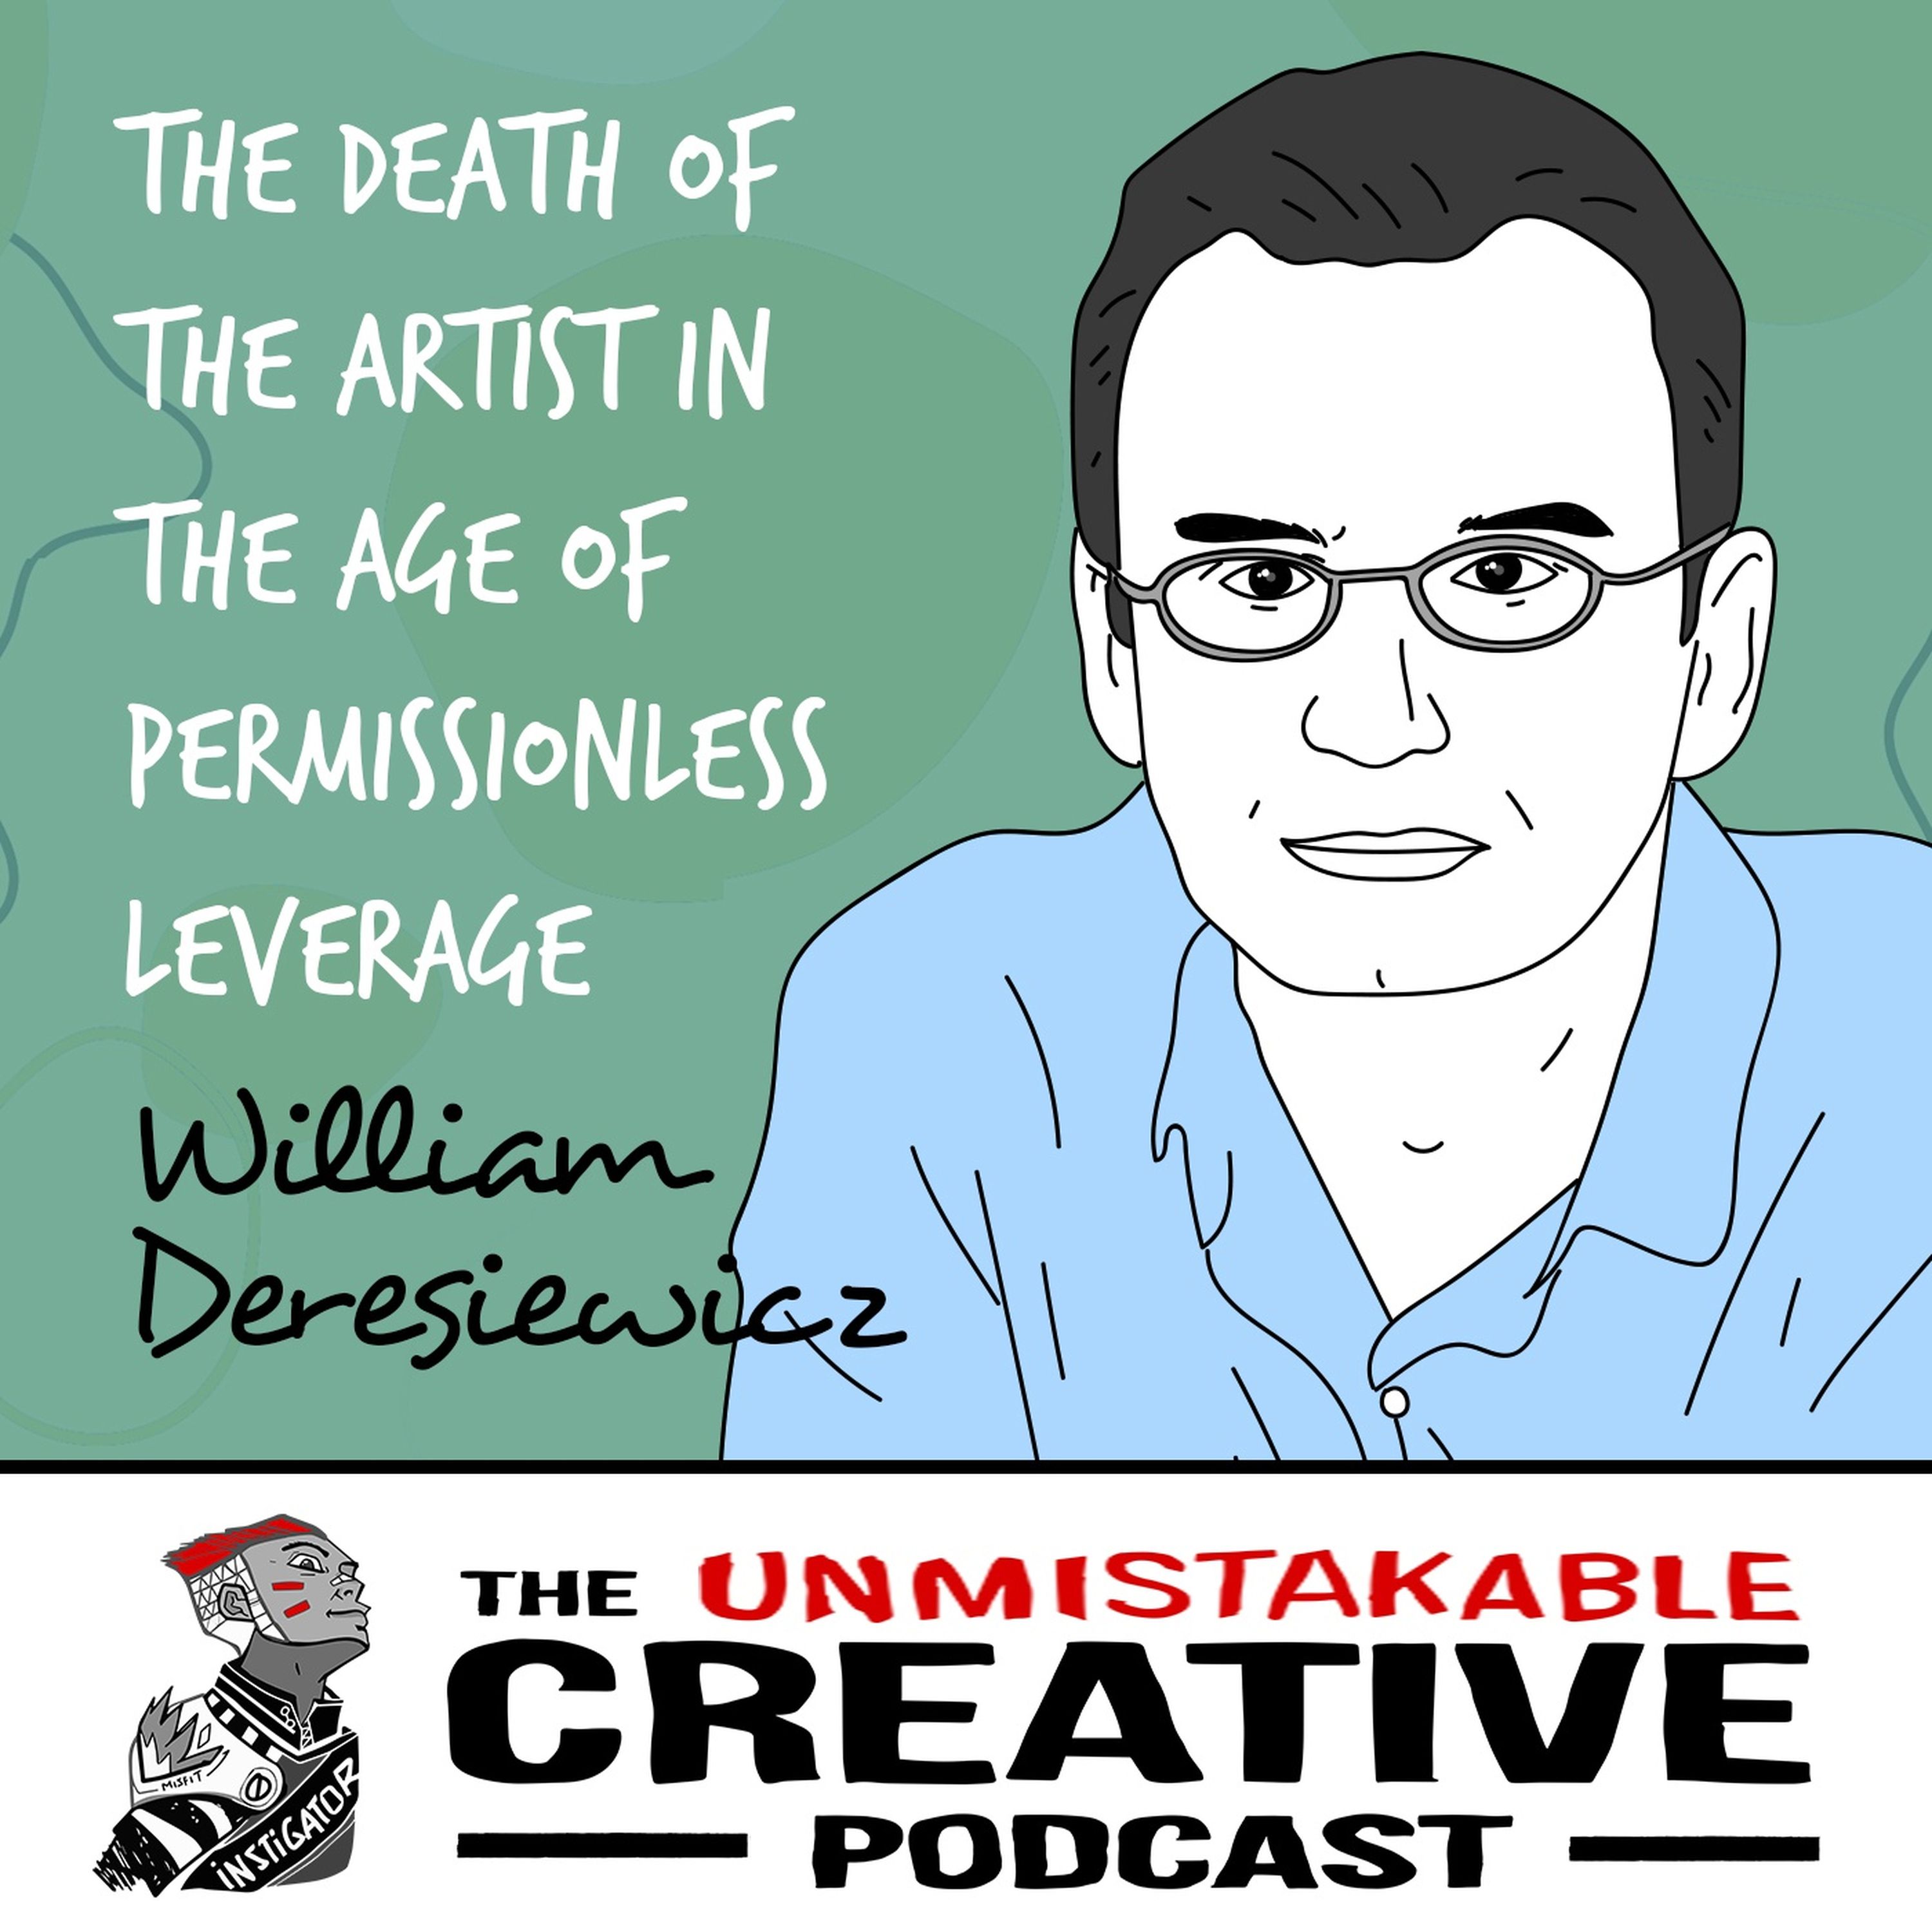 William Deresiewicz | The Death of the Artist in the Age of Permission-less Leverage Image